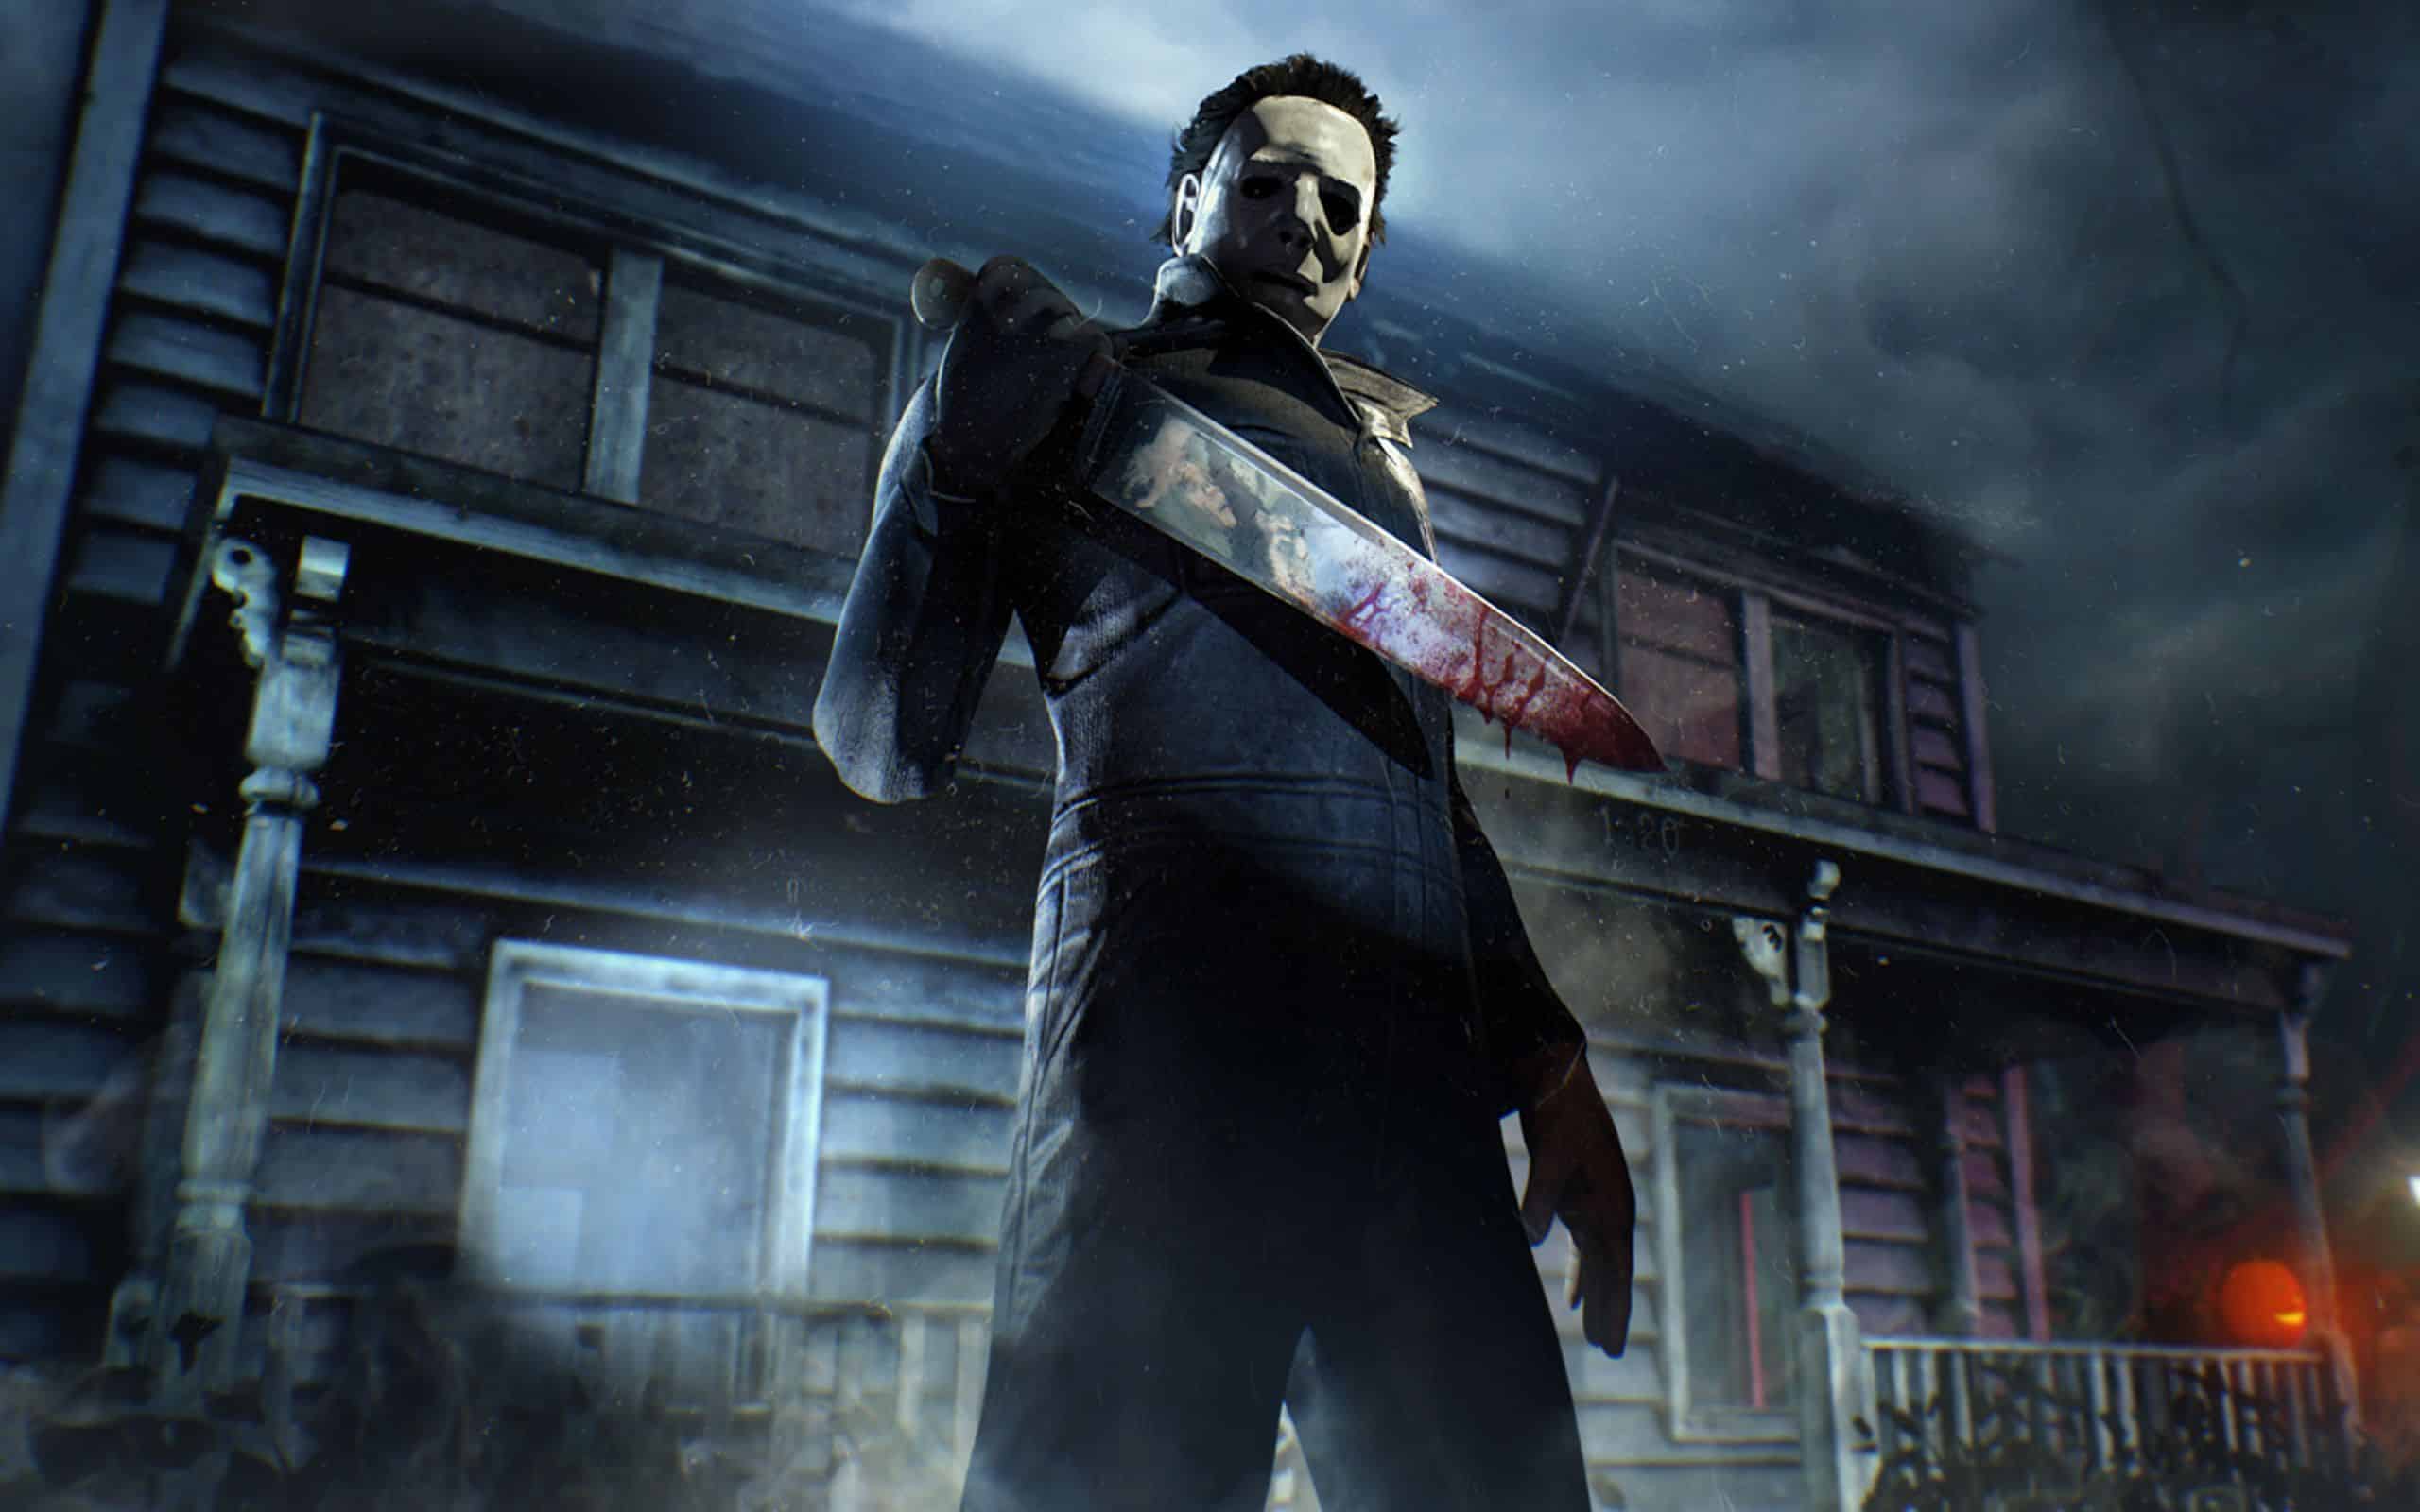 Double XP from ALL matches until October 10th! : r/deadbydaylight